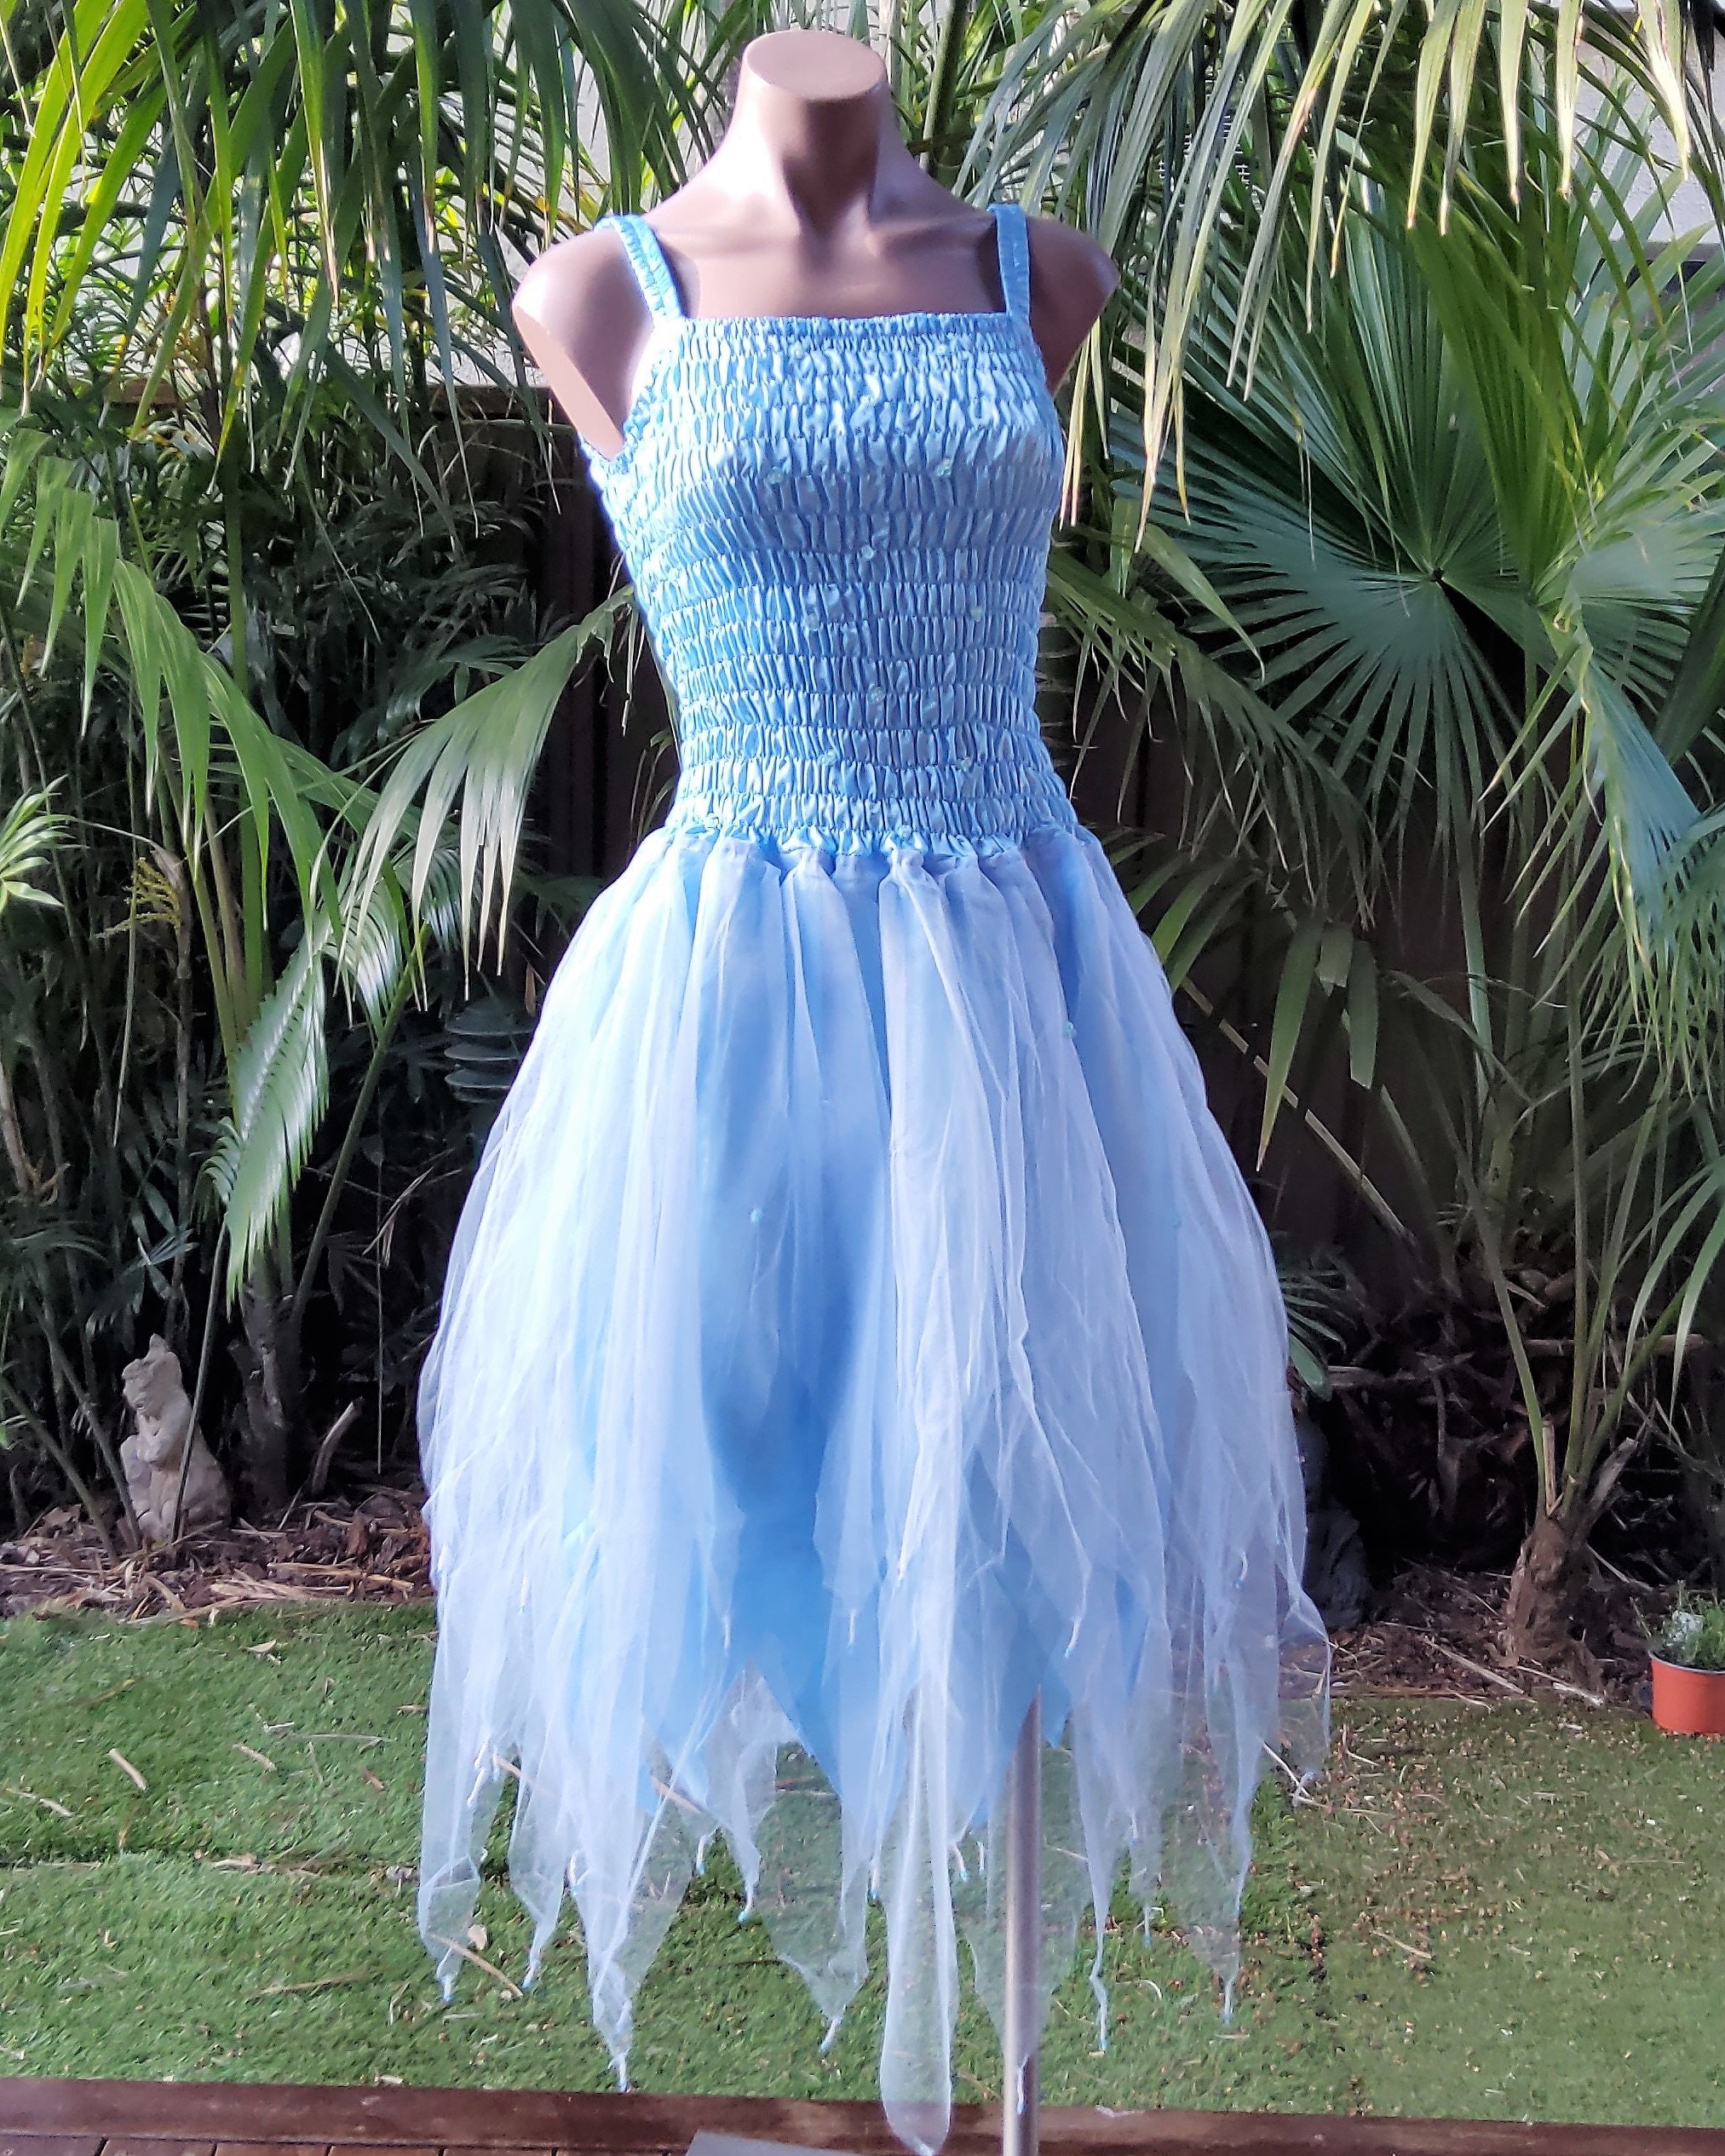 Tinkerbell Fairy Dress for Birthday Costume or Photo Shoot Tinkerbell Dress  Outfit Birthday Dress Costume Princess Dress for Birthday Party - Etsy | Fairy  dress, Tinkerbell dress, Birthday dresses